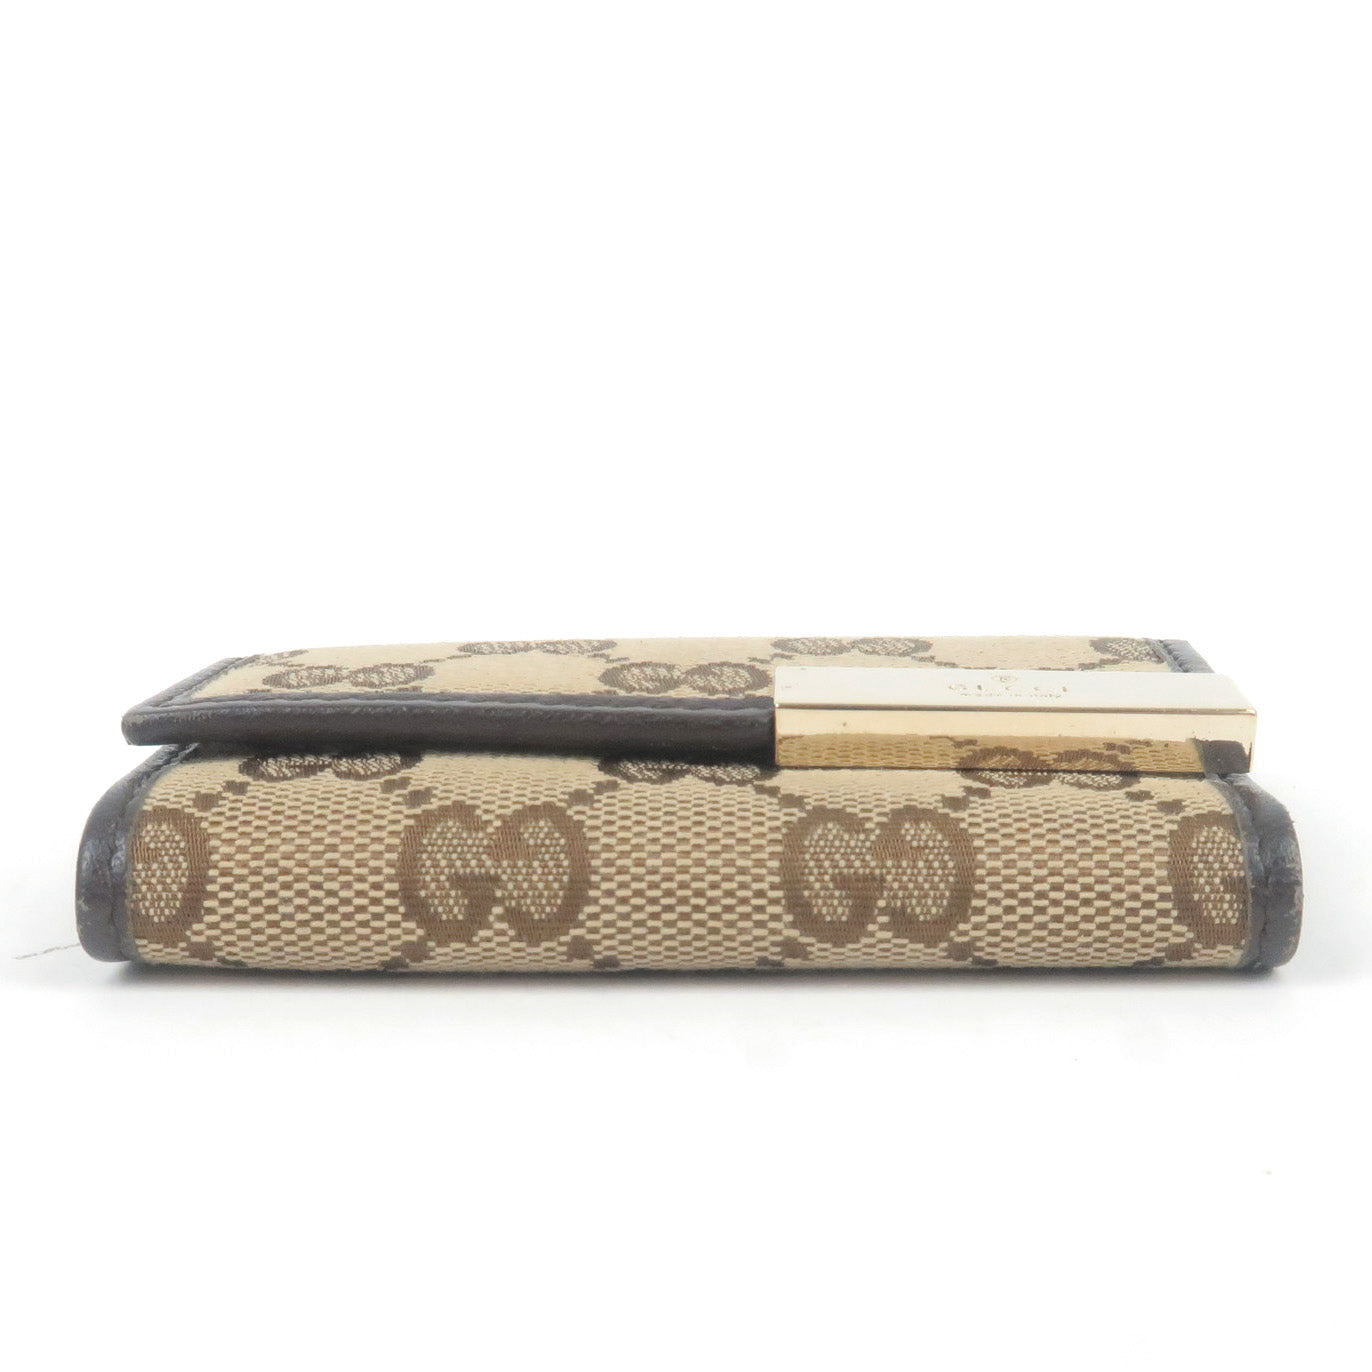 Gucci Ophidia Gg Key Case